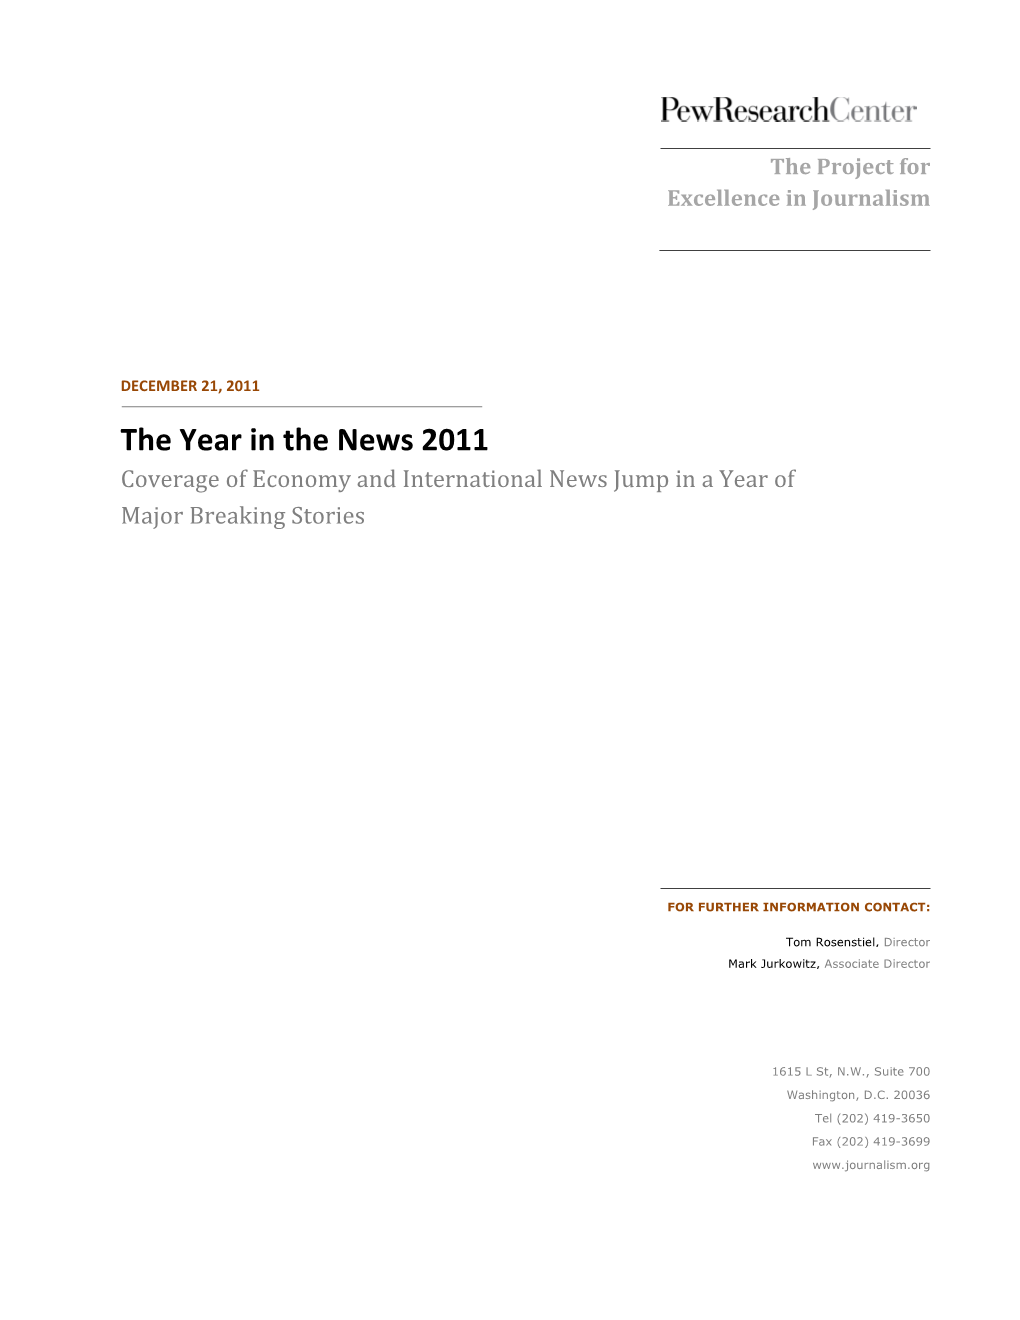 The Year in the News 2011 Coverage of Economy and International News Jump in a Year of Major Breaking Stories